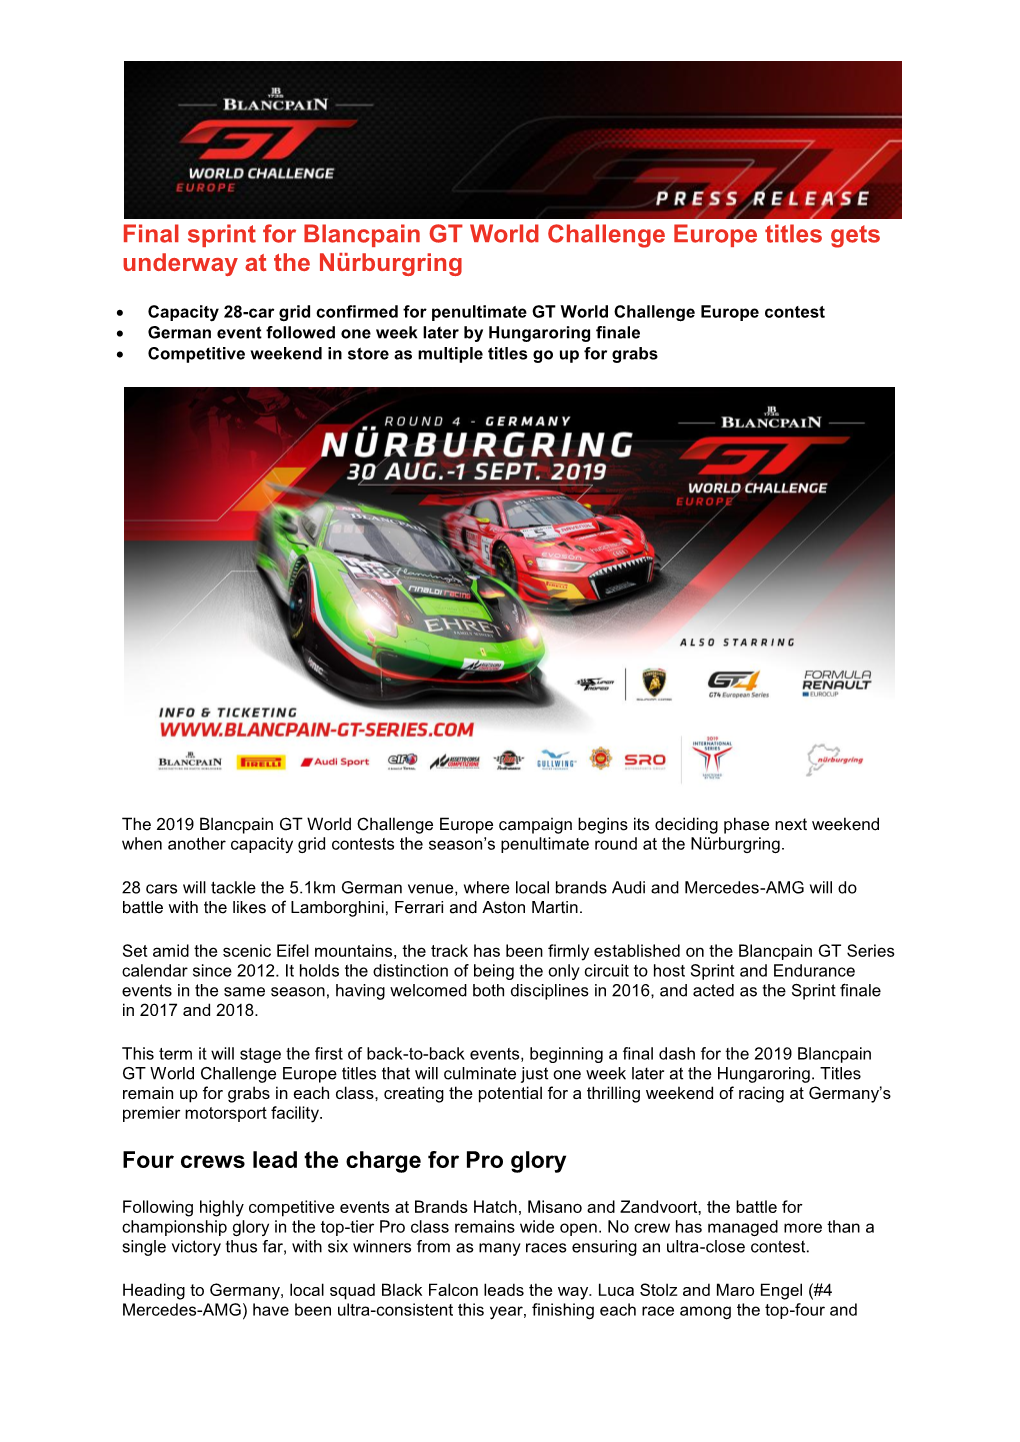 Final Sprint for Blancpain GT World Challenge Europe Titles Gets Underway at the Nürburgring